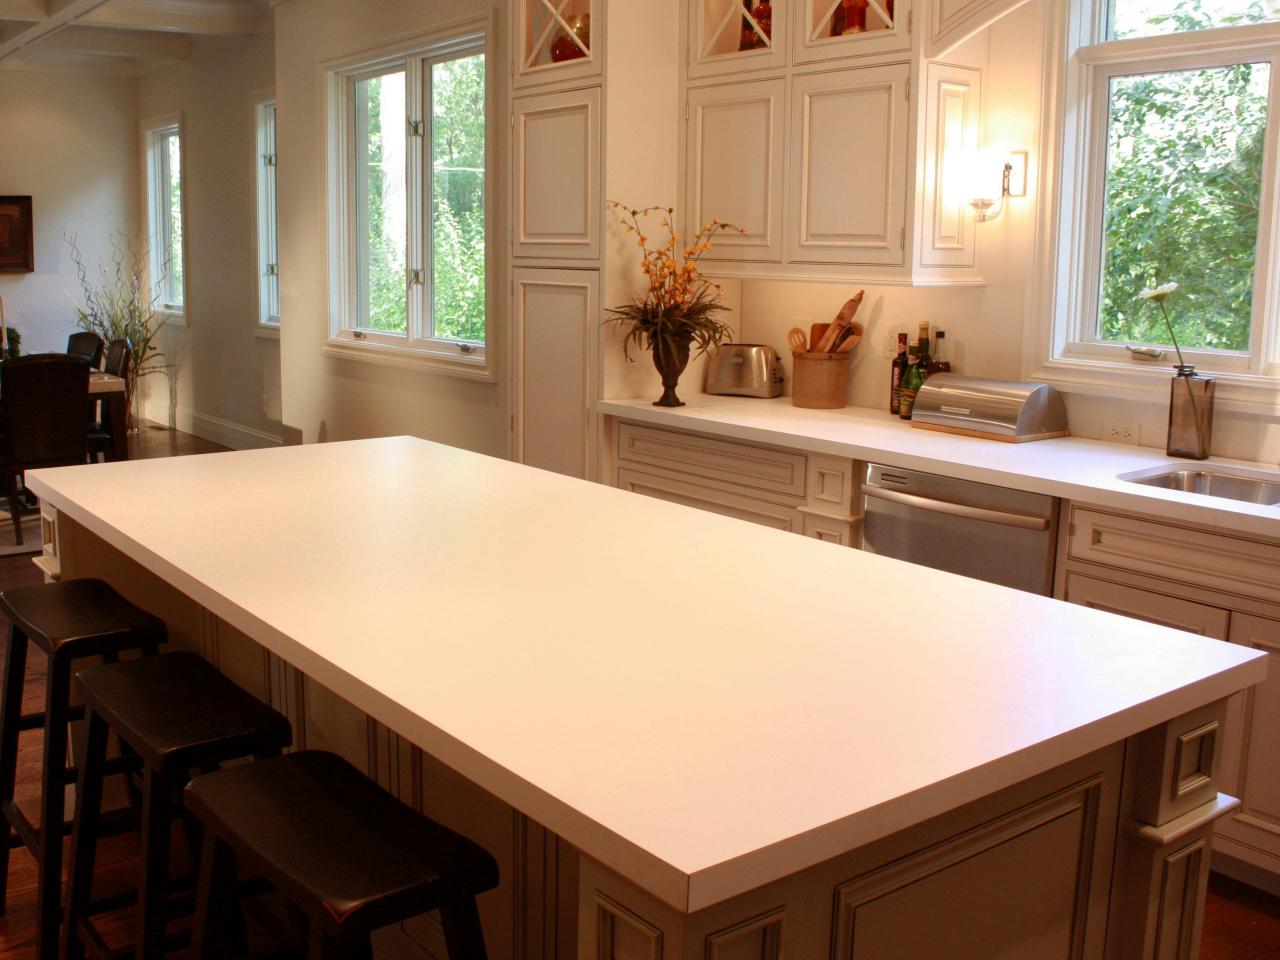 How to Paint Laminate Kitchen Countertops DIY